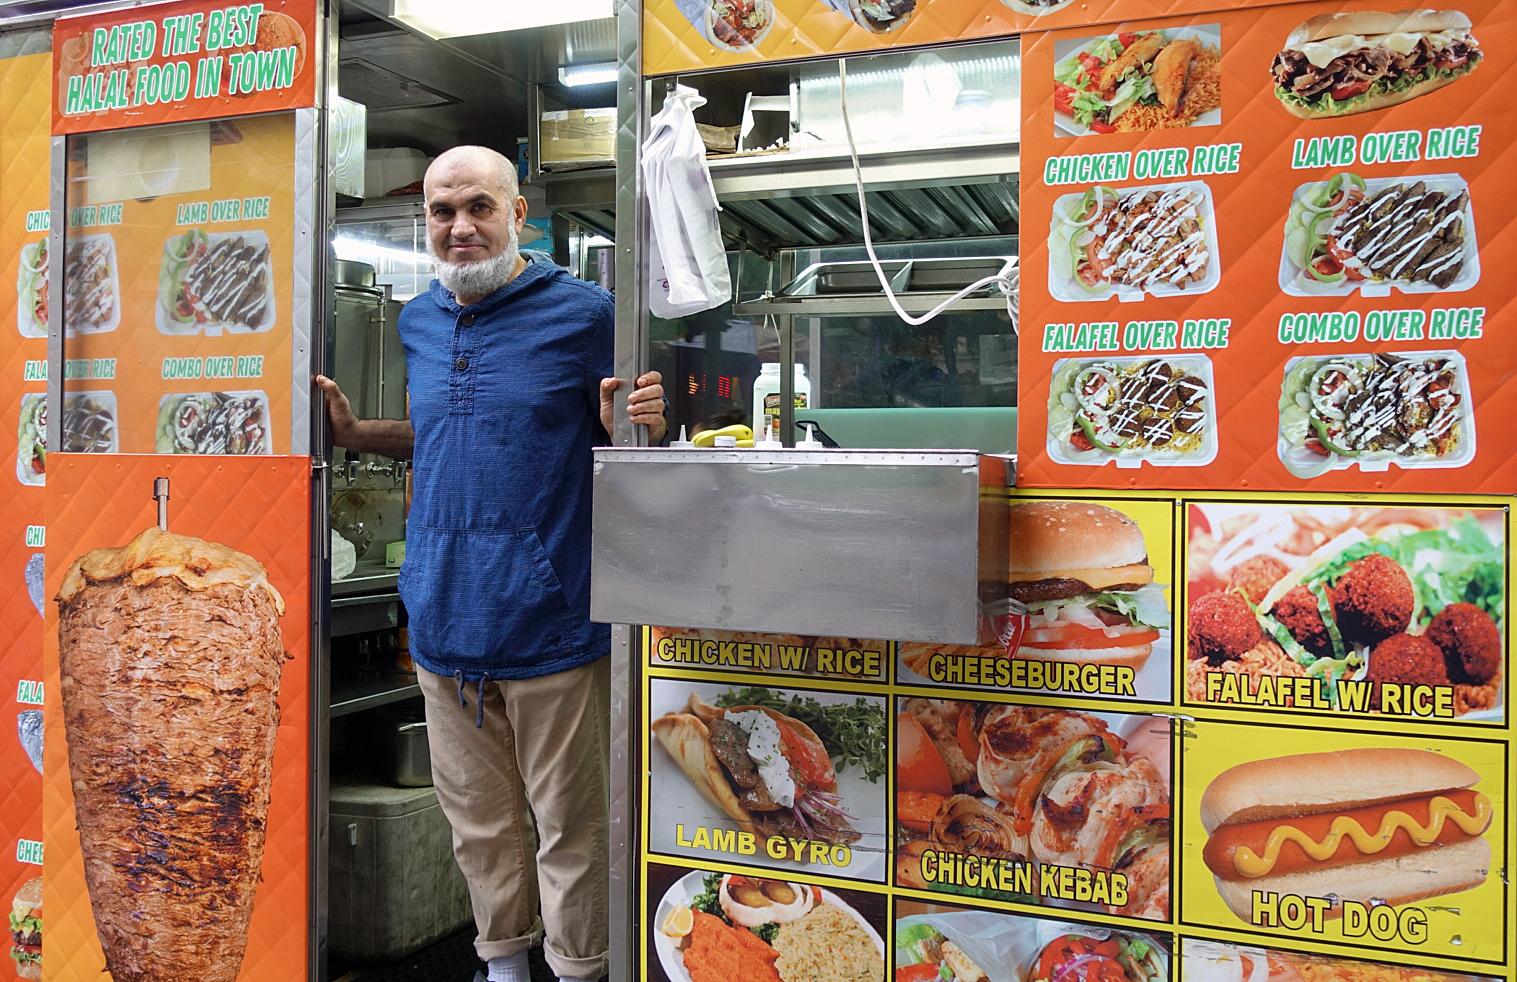 Adel Saeed moved to the US from Egypt 41 years ago. He has owned and operated a halal food truck in New York City for 20 years. He says he will never break his fast, even he is offered "millions and millions of dollars."